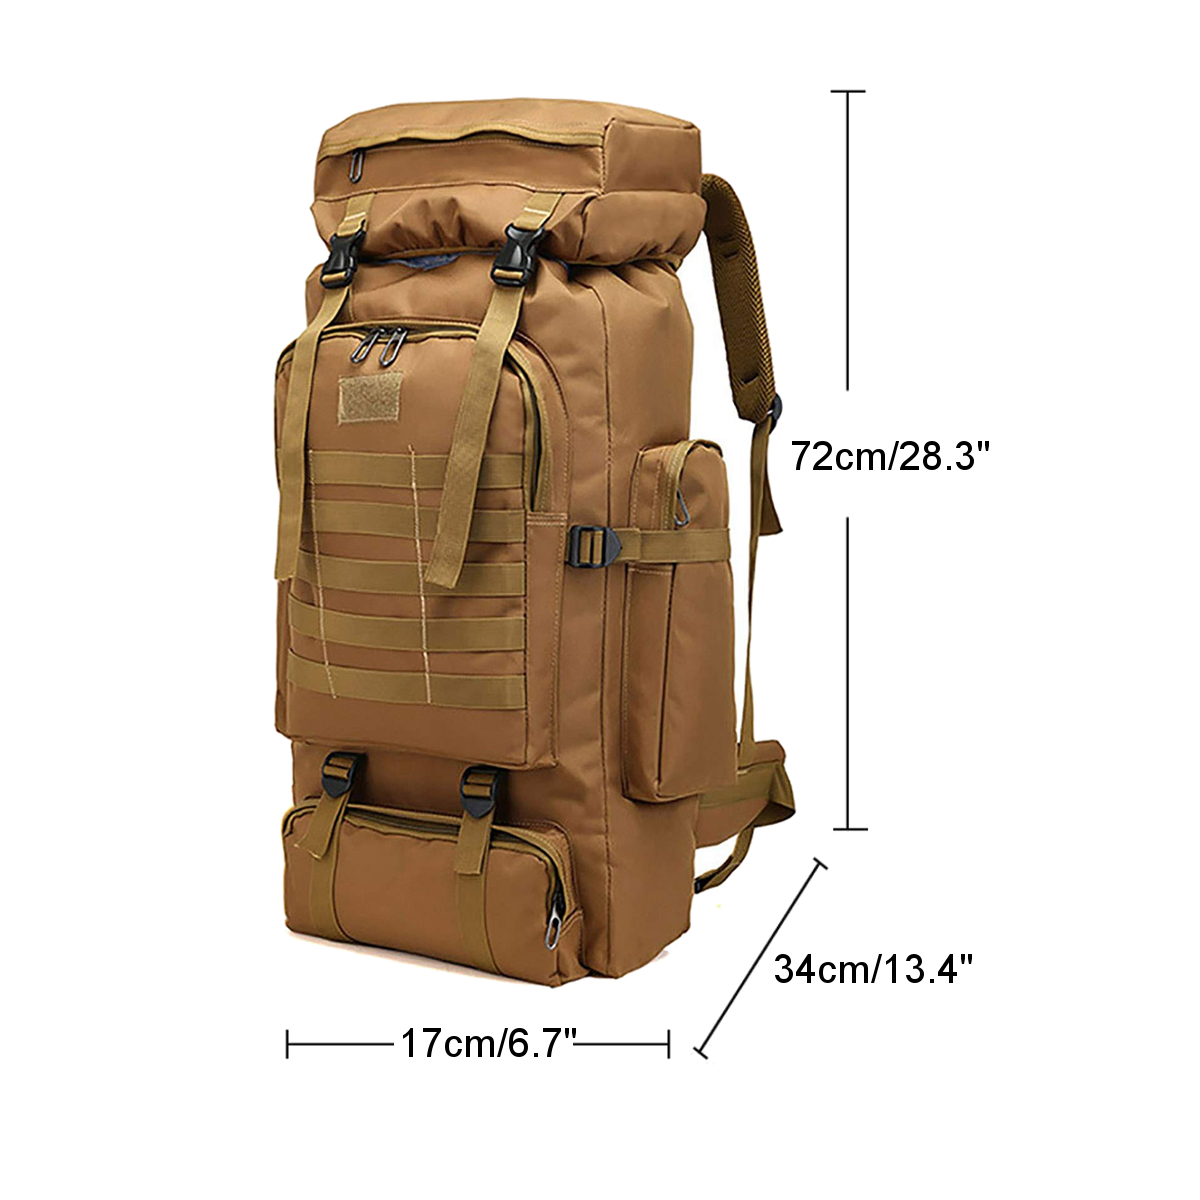 Military Tactical Backpack Novashion 80L Large Capacity Camping Hiking Backpack Rucksack Waterproof Traveling Daypack for Outdoor, Gift for Boy and Girl - image 3 of 4